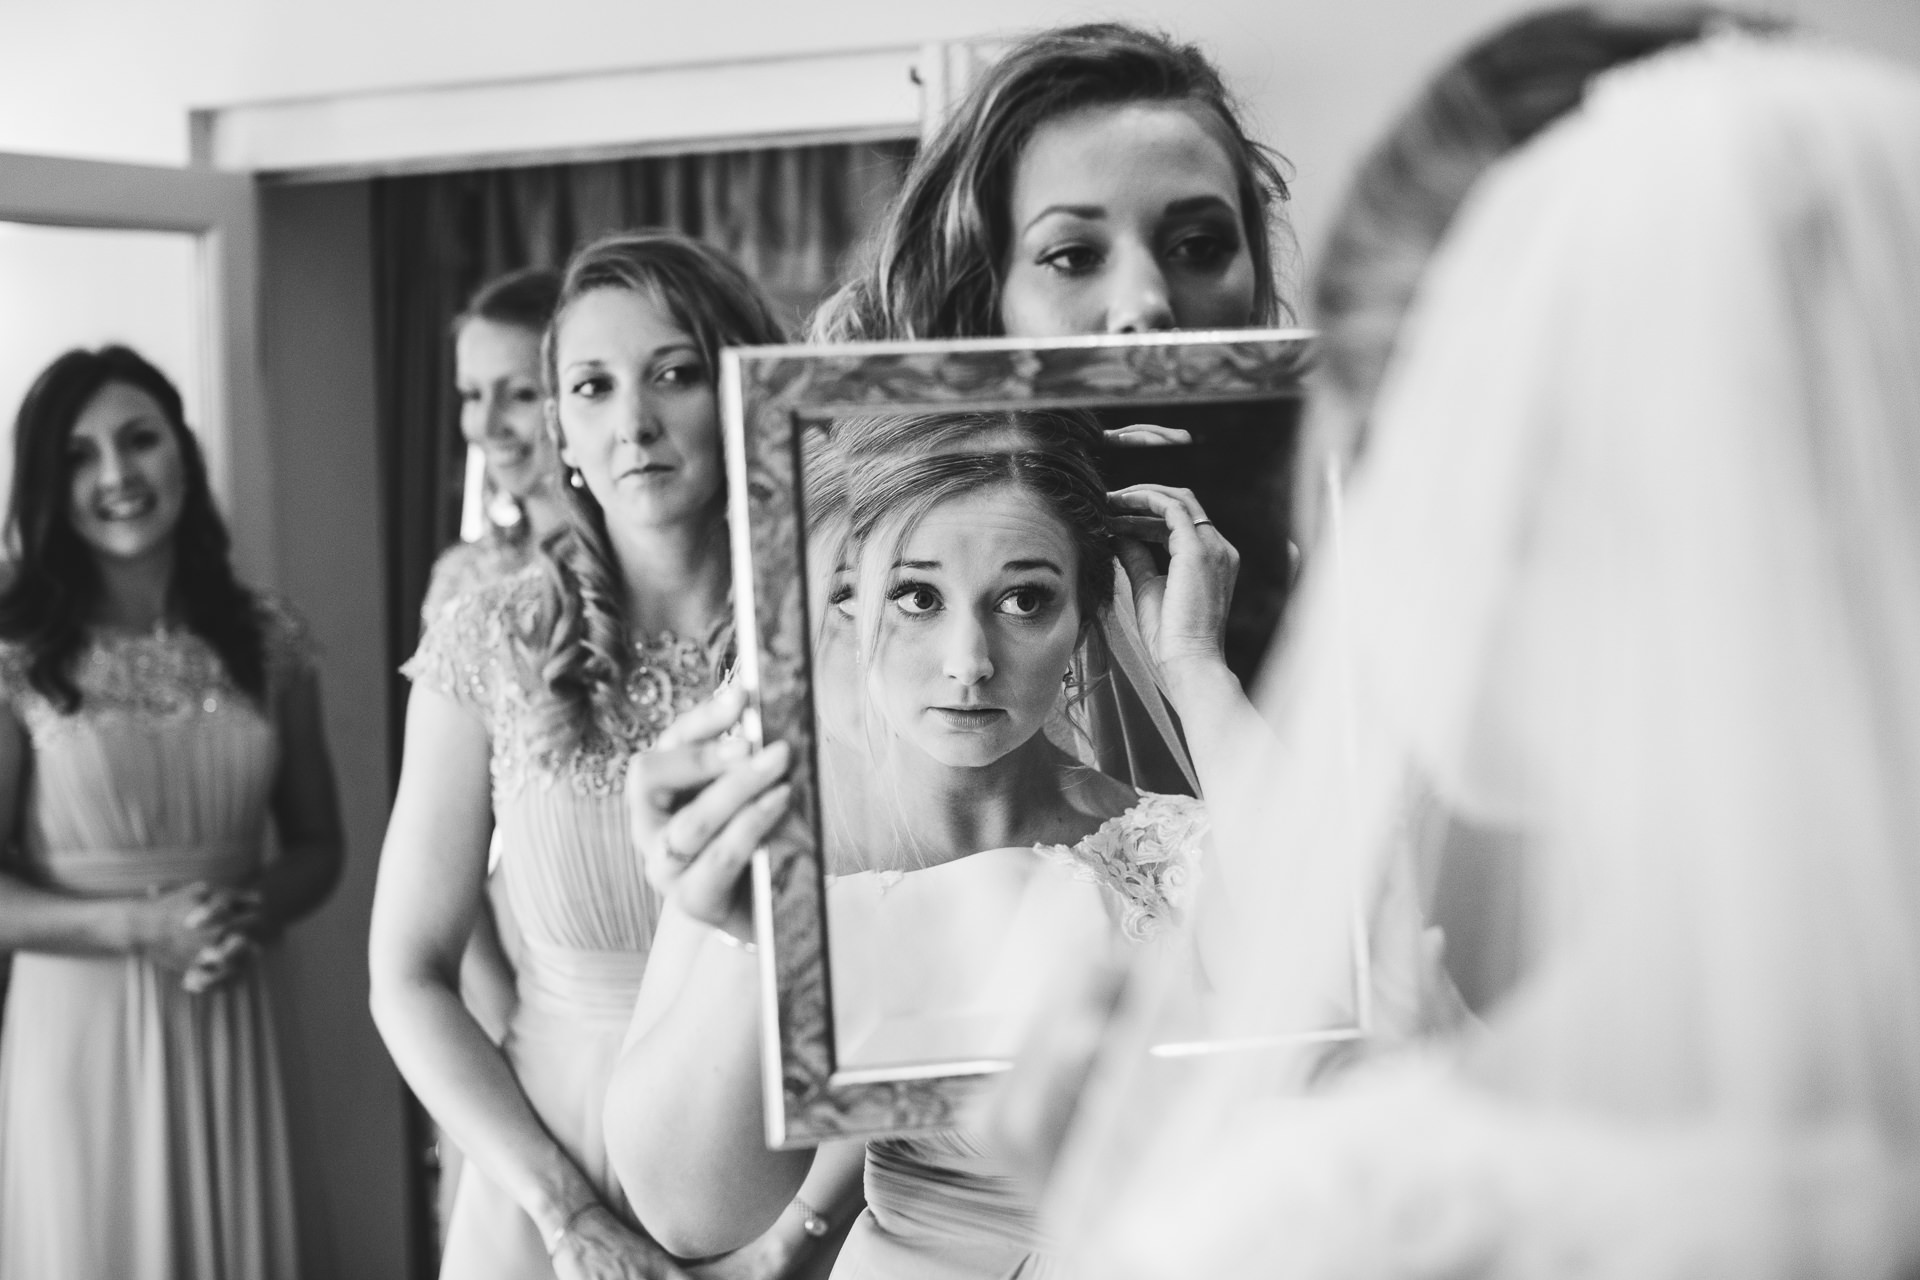 Bride-to-be looking in mirror with bridesmaids behind